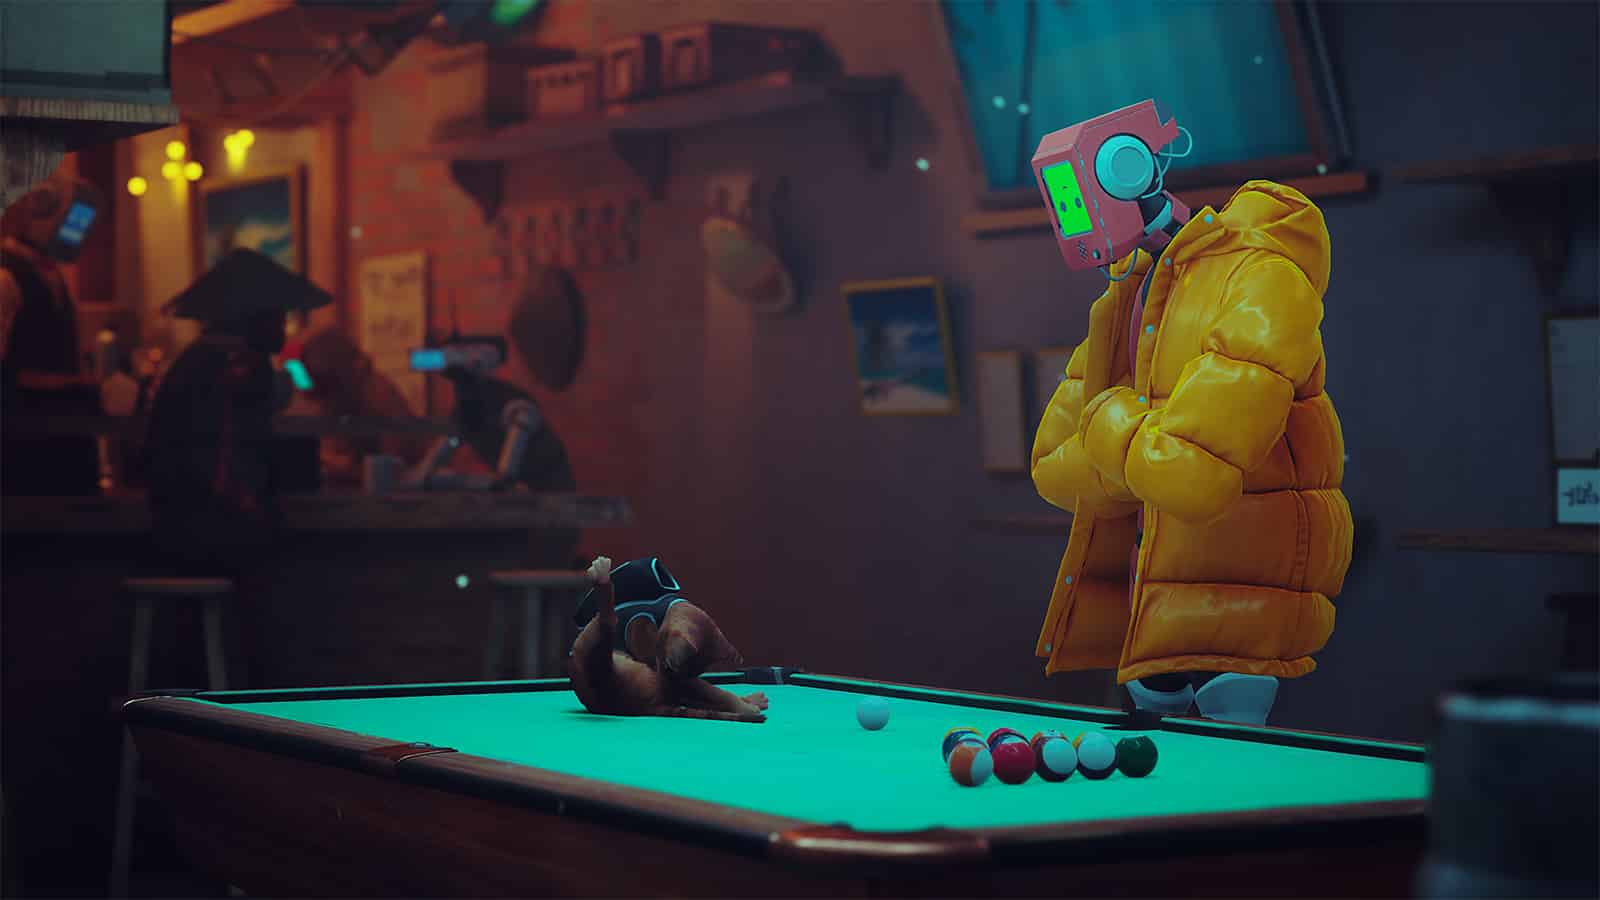 The cat in Stray laying on a pool table with a Robot beside it